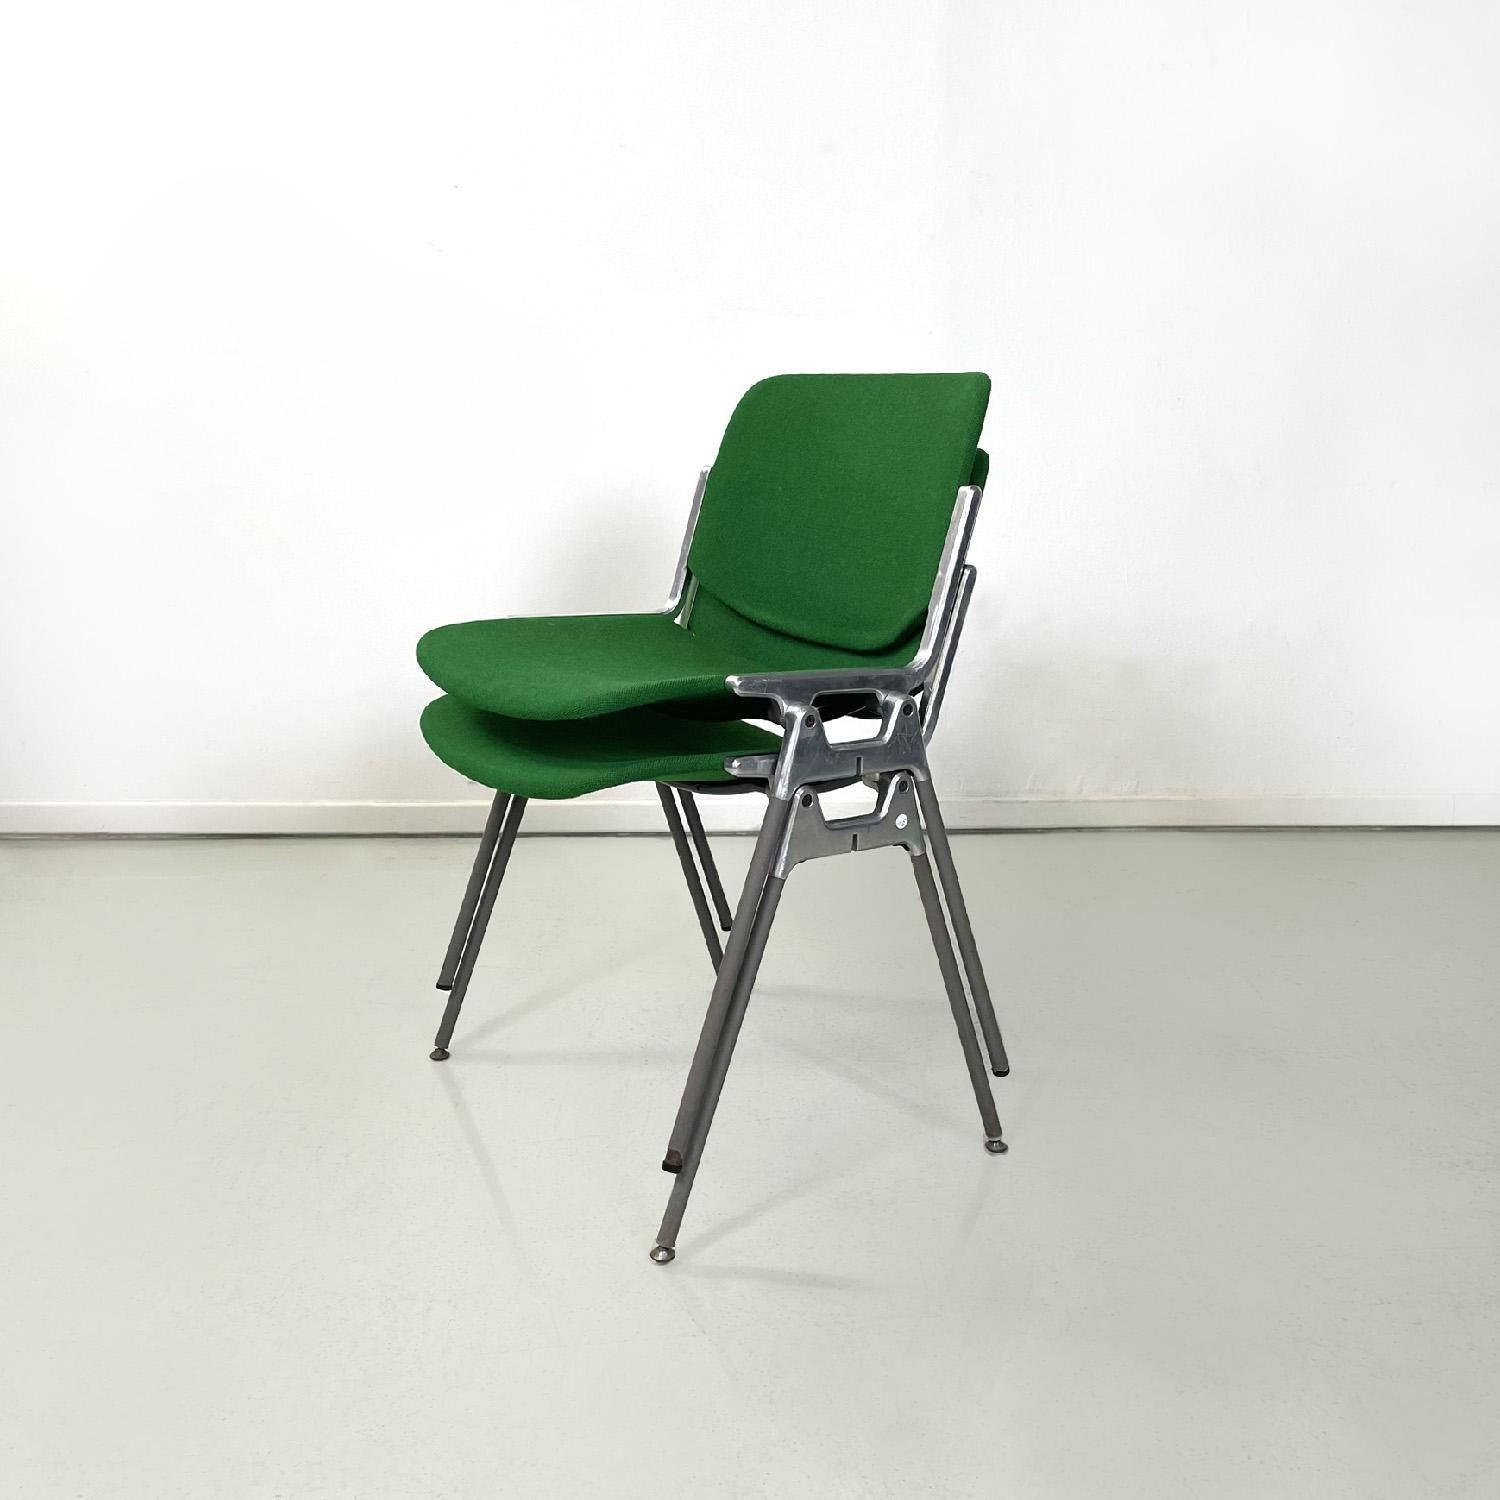 Italian mid-century modern DSC chairs Giancarlo Piretti Anonima Castelli, 1965
DSC model chairs with rounded rectangular seat and back, upholstered in bright green fabric. The sturdy structure is in aluminum with round section legs covered in gray